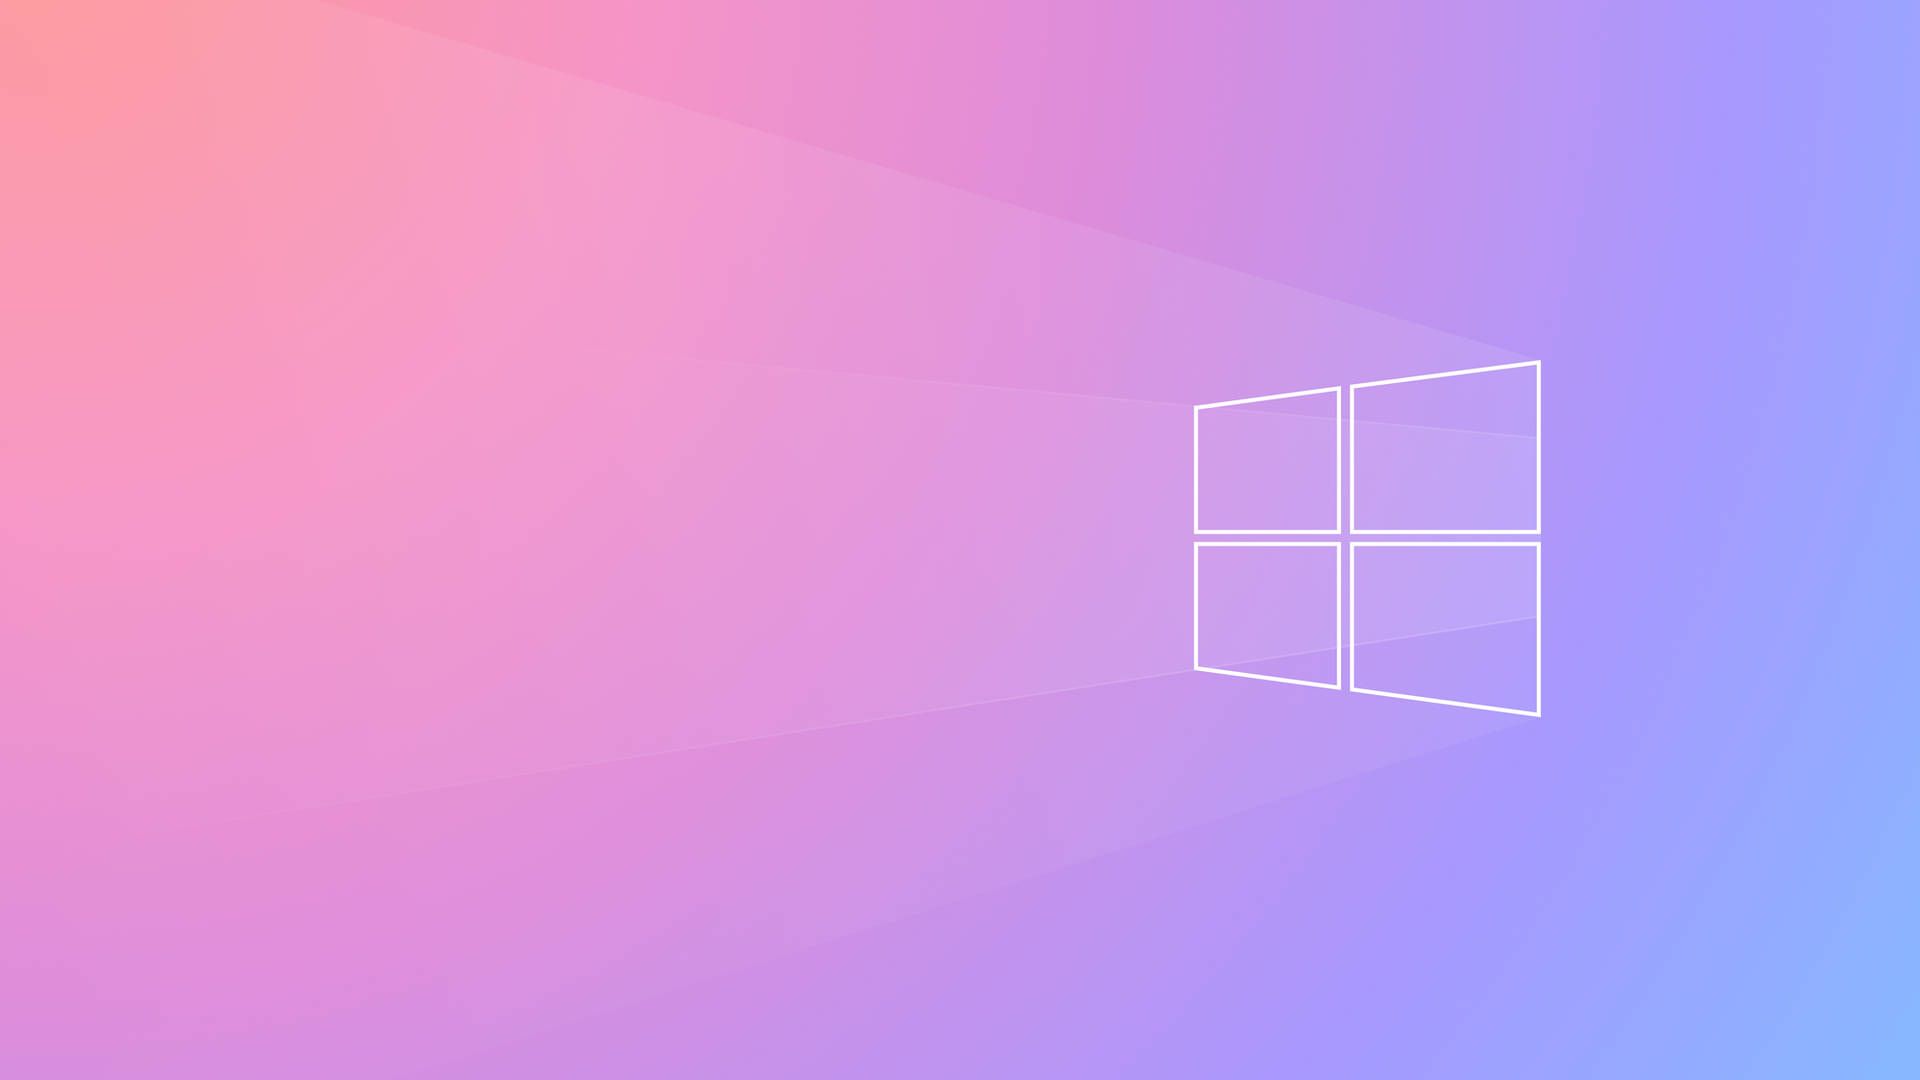 Windows 10 wallpaper with a colorful background - Windows 11